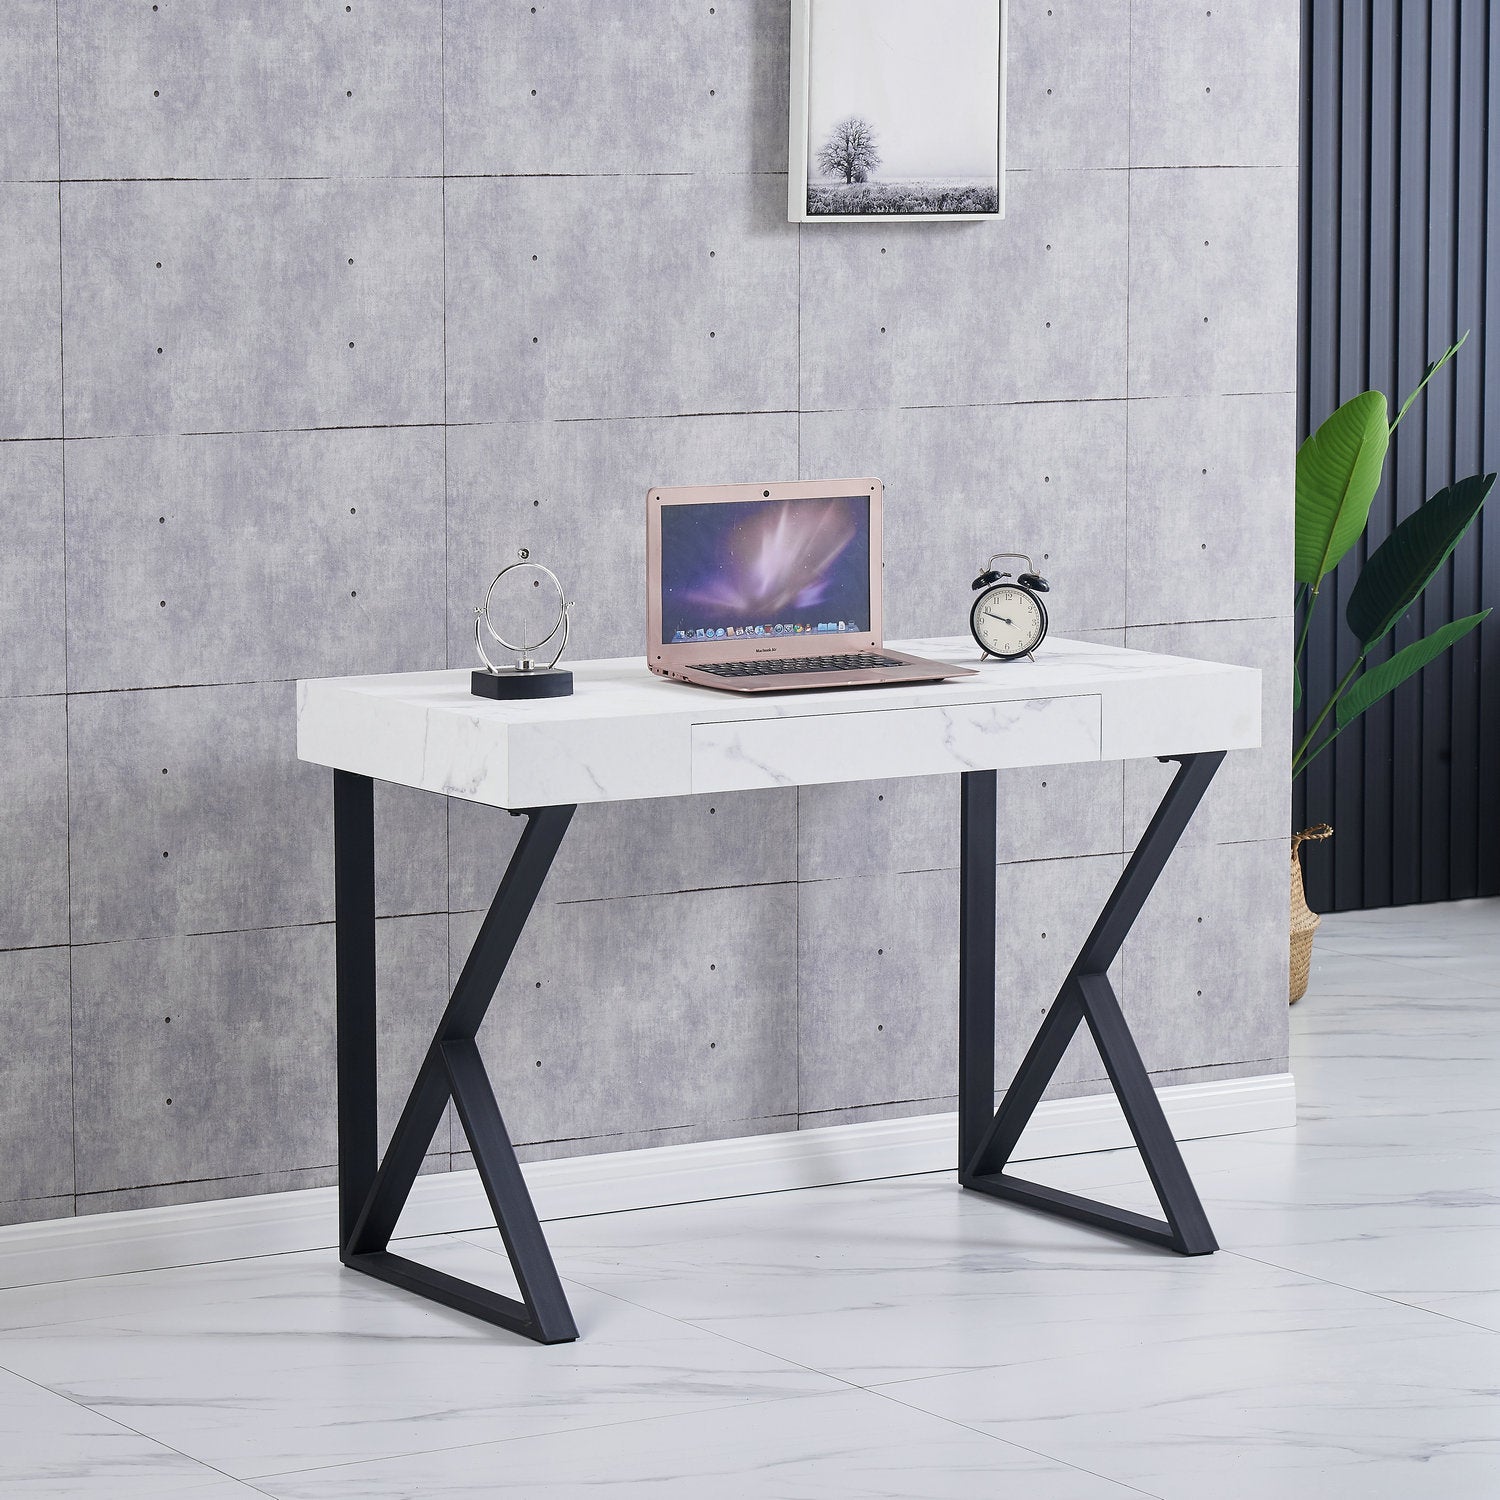 AINPECCA Computer Desk Study Table with Drawer Faux Marble white 110x55CM Metal legs Home Office